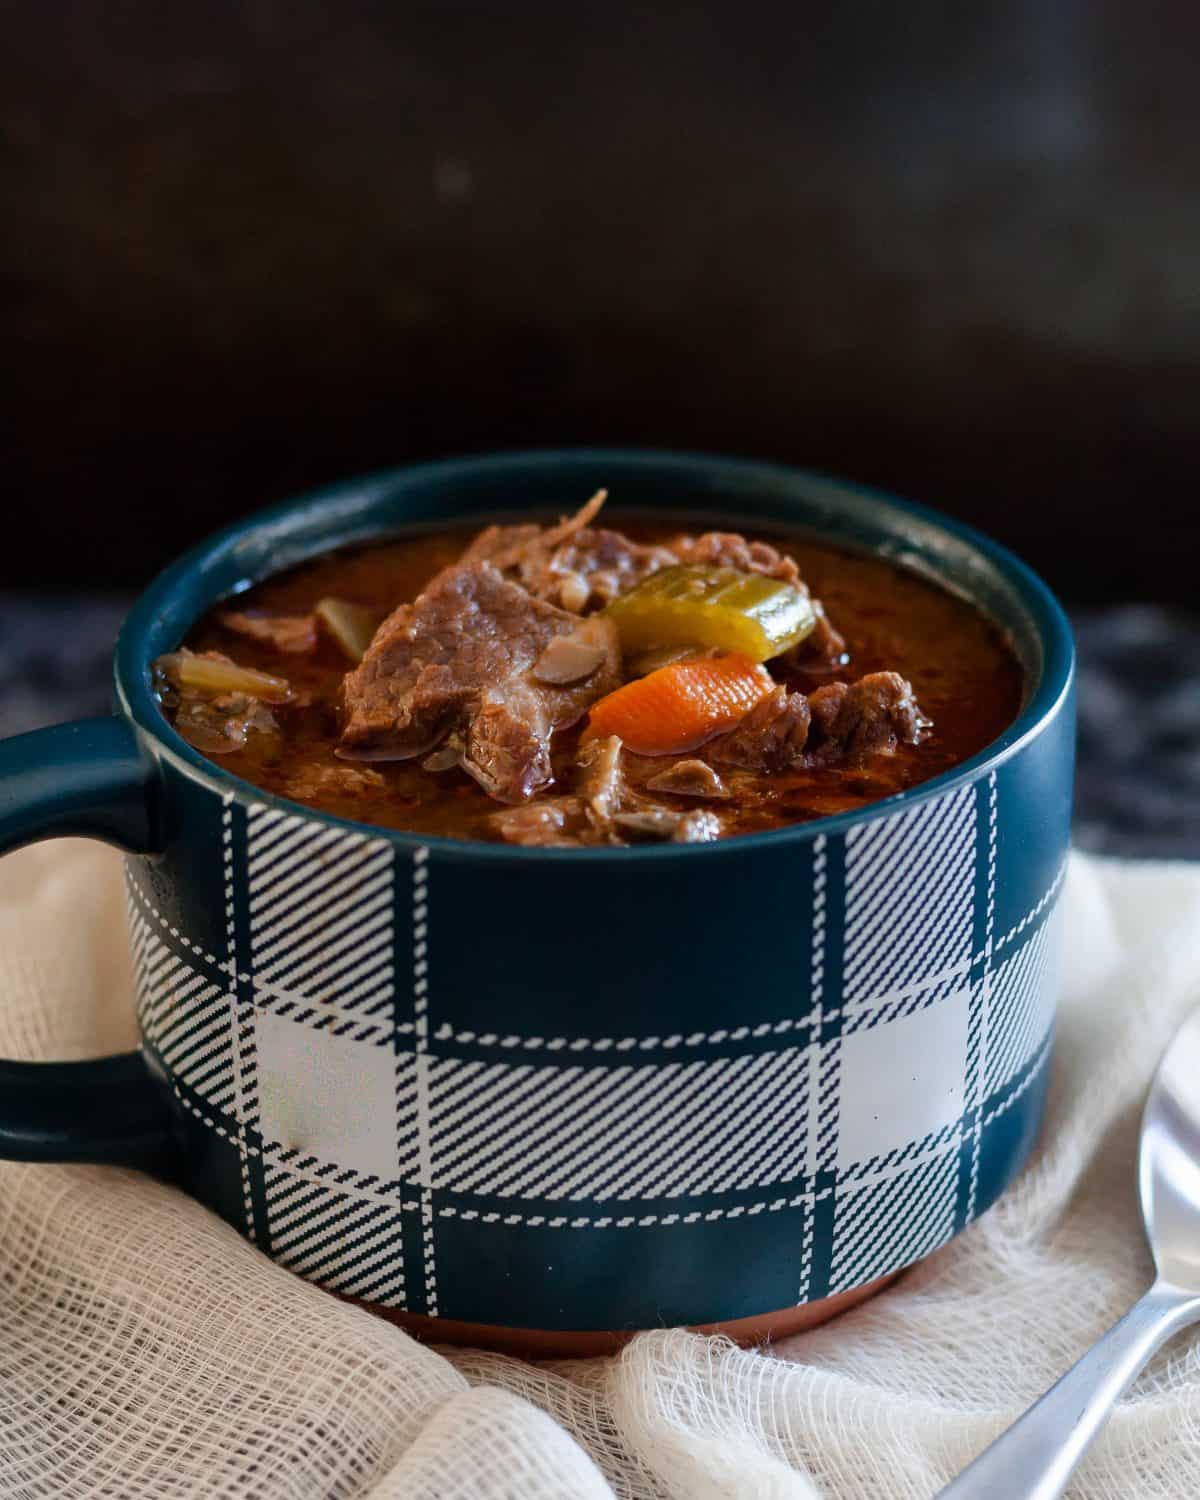 Easy to make, and customize,  this easy Guinness beef stew recipe is a cold weather family favorite around Saint Patrick's Day.  * GoodieGodmother.com